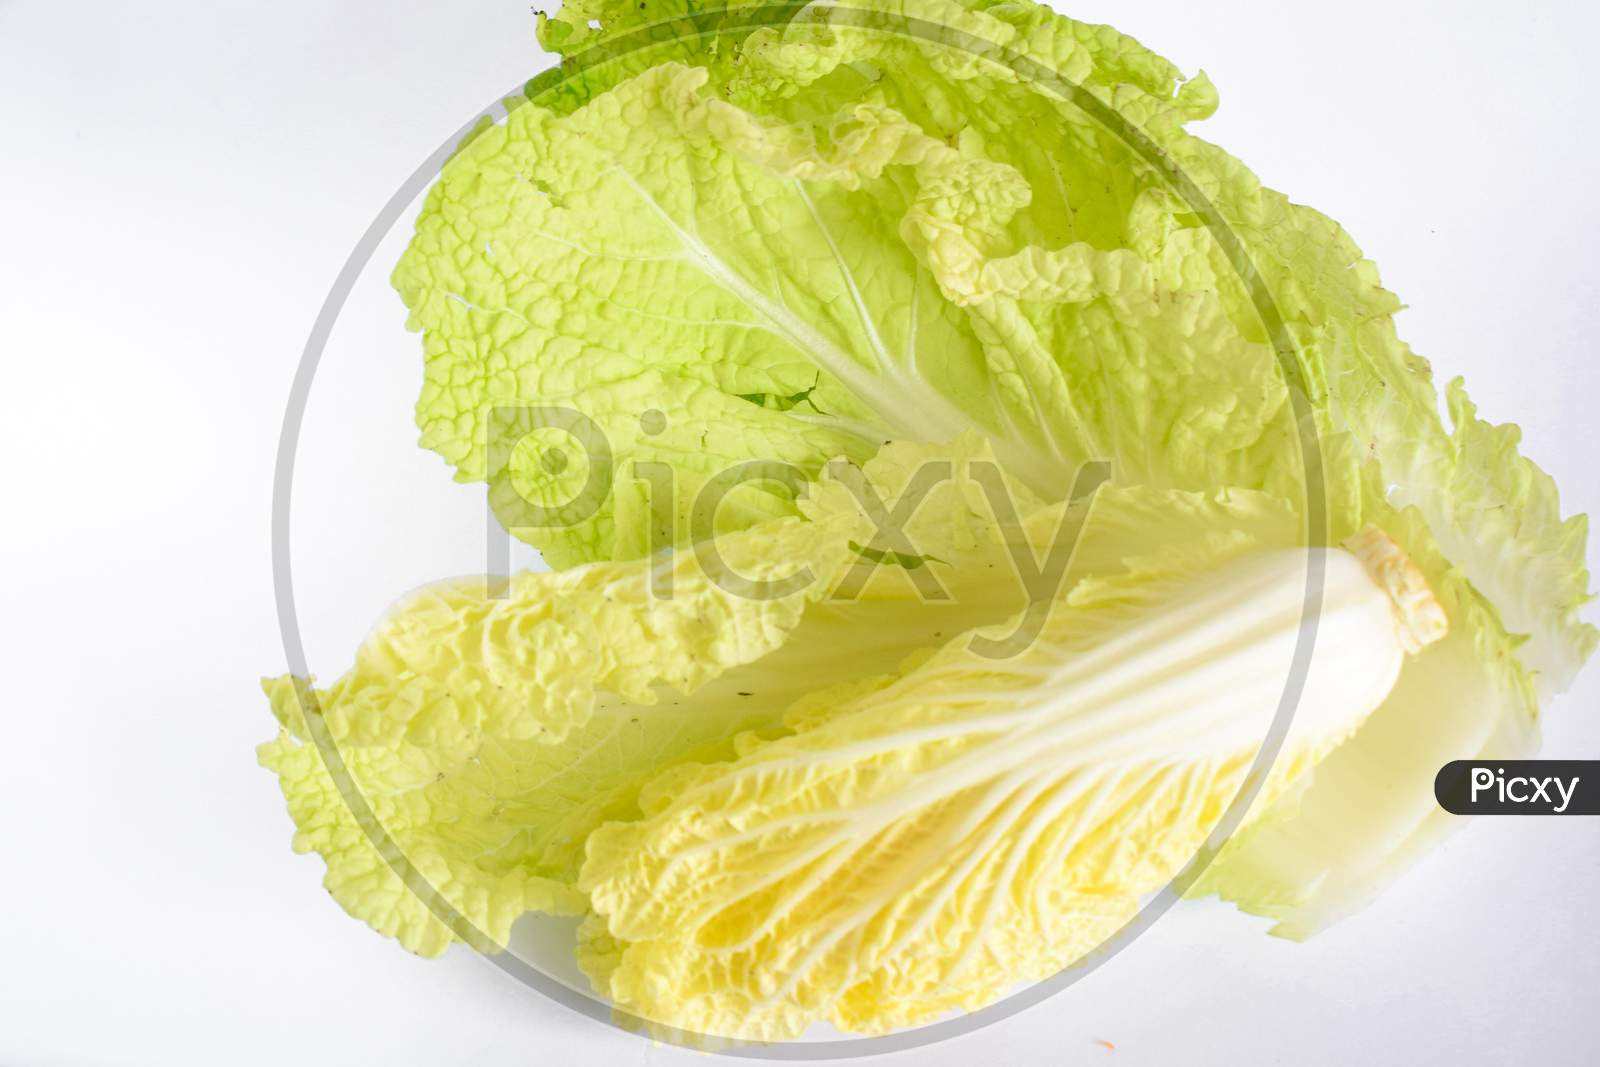 Isolated cabbage vegetables and carrots photo on white background